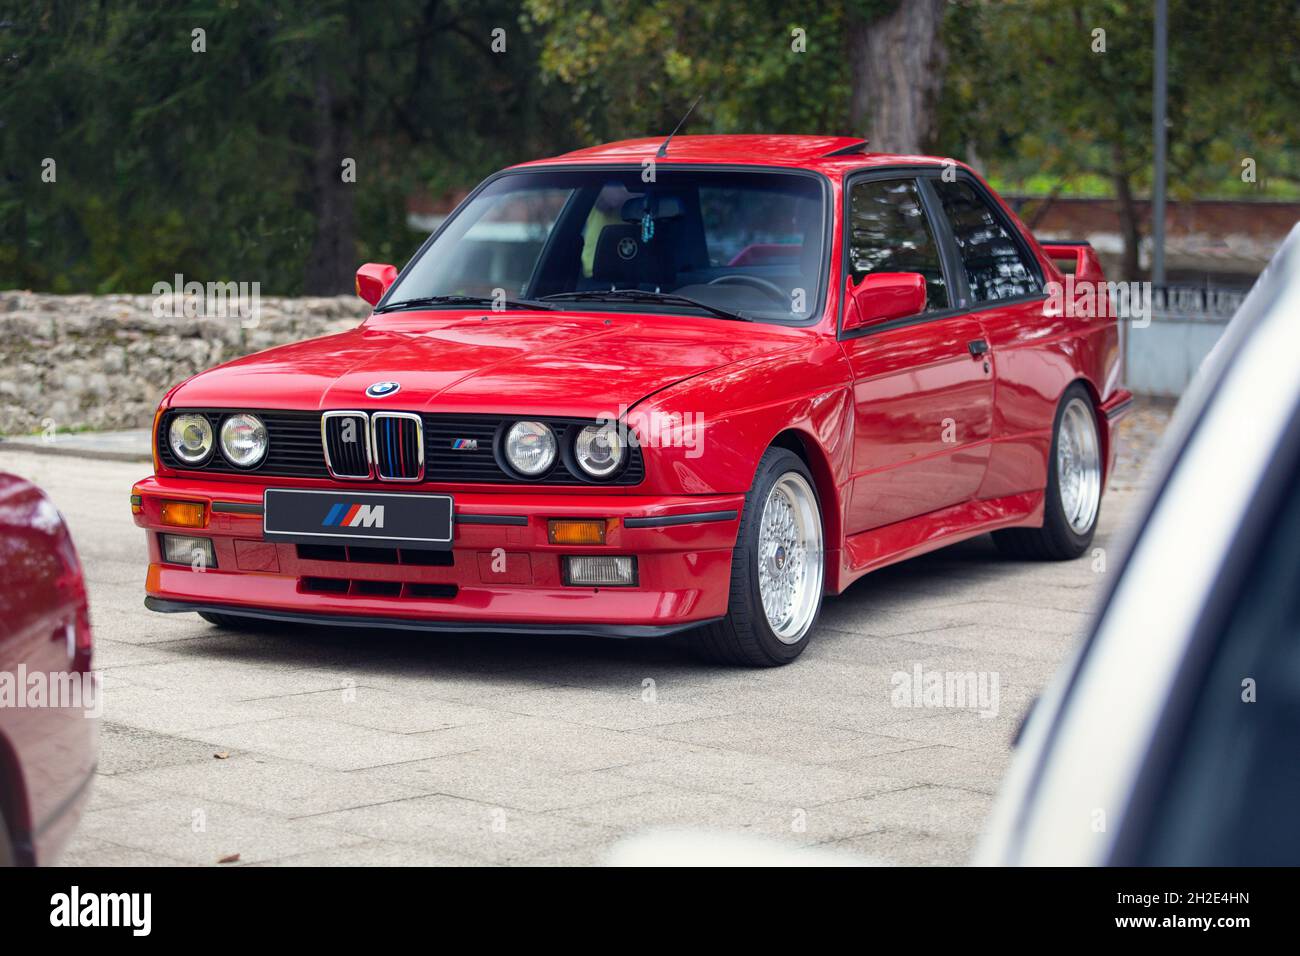 Reocin, Cantabria, Spain - October 2, 2021: Exhibition of classic vehicles. The first BMW M3 was based on the E30 3 Series and It was presented to the Stock Photo